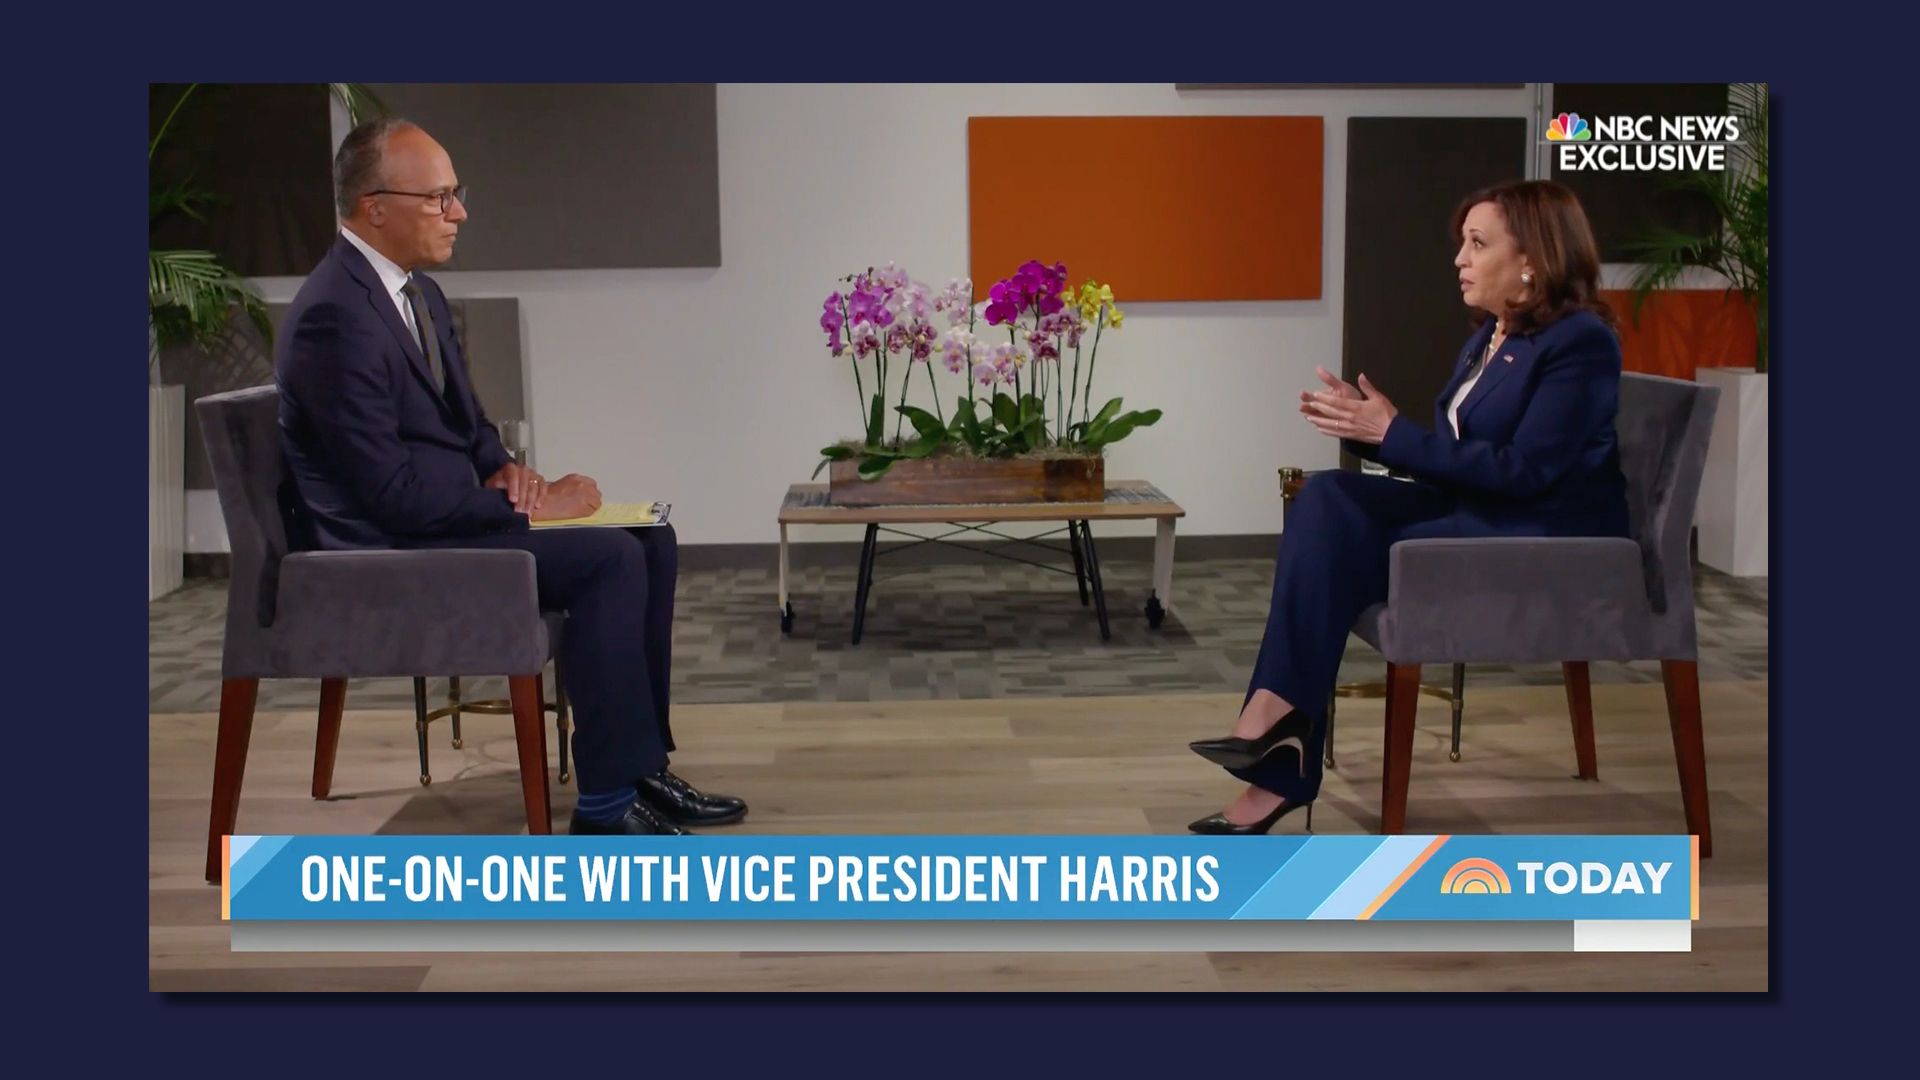 Vice President Kamala Harris is seen speaking during an interview with NBC's Lester Holt.